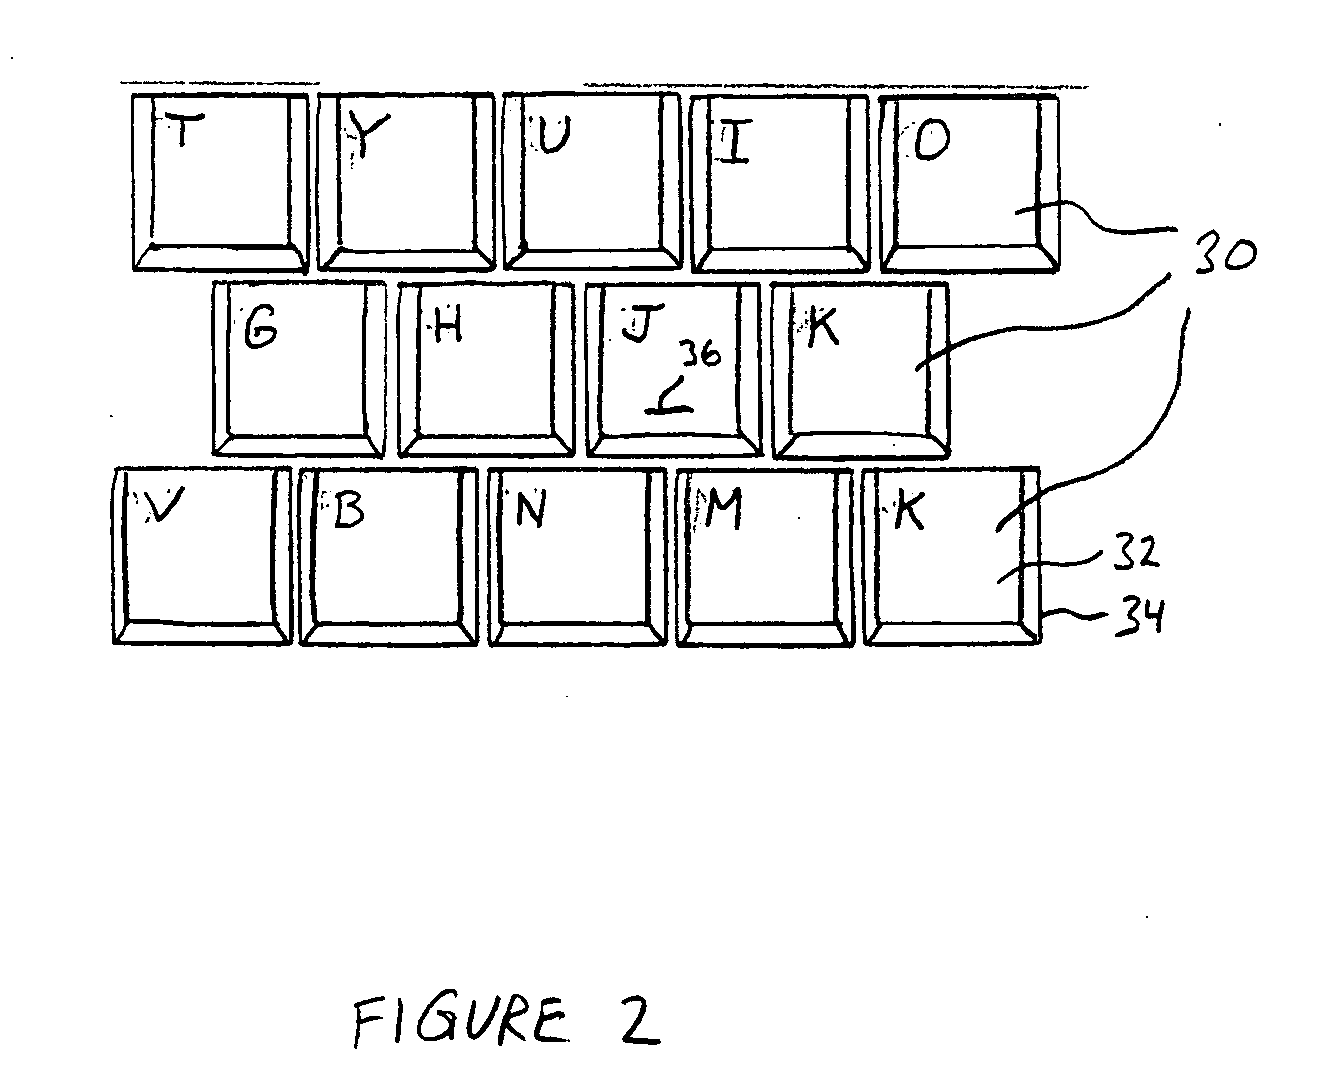 Touchpad integrated into a key cap of a keyboard for improved user interaction